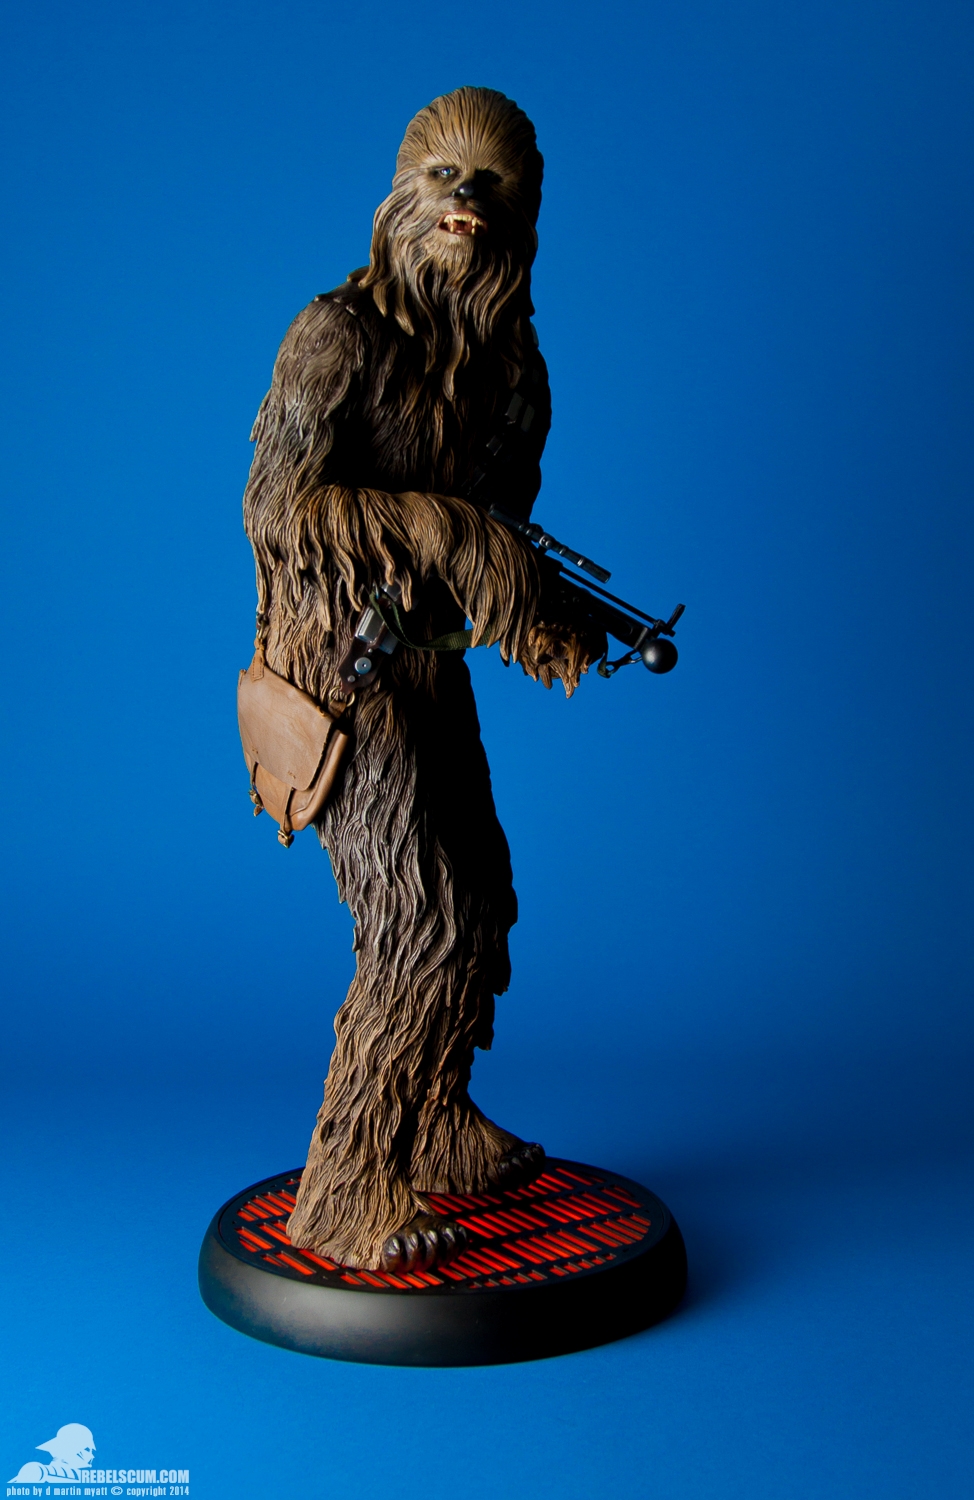 Chewbacca-Premium-Format-Figure-Sideshow-Collectibles-Exclusive-019.jpg